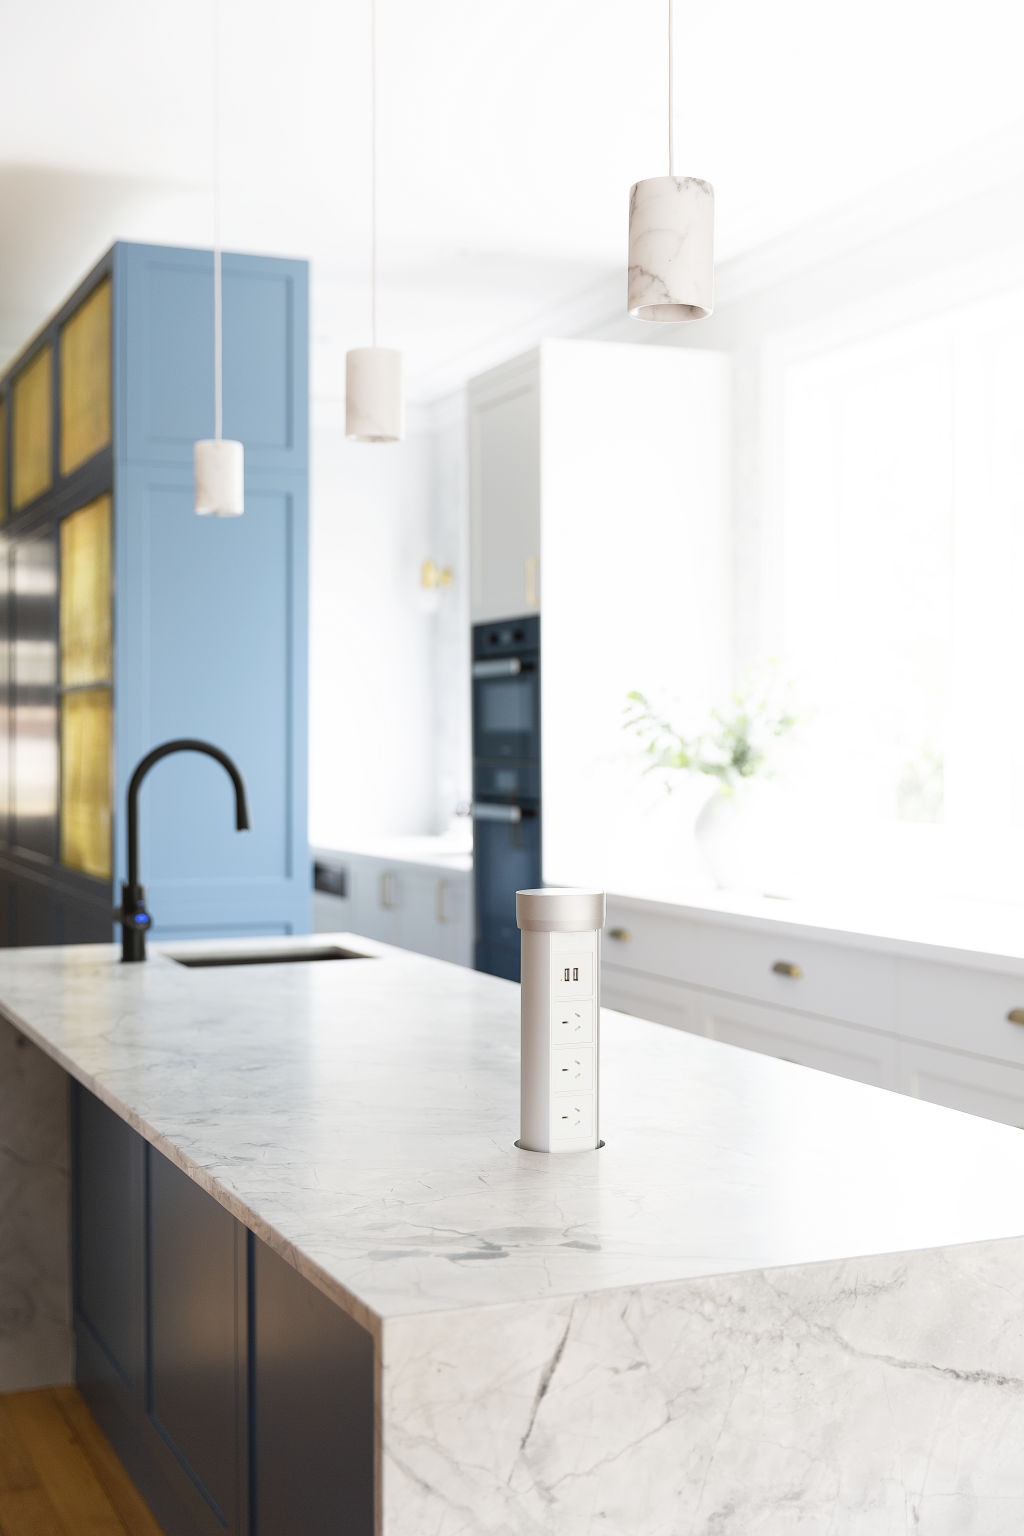 Make sure your kitchen is working smarter, not harder. Photo: Richard Whitbread